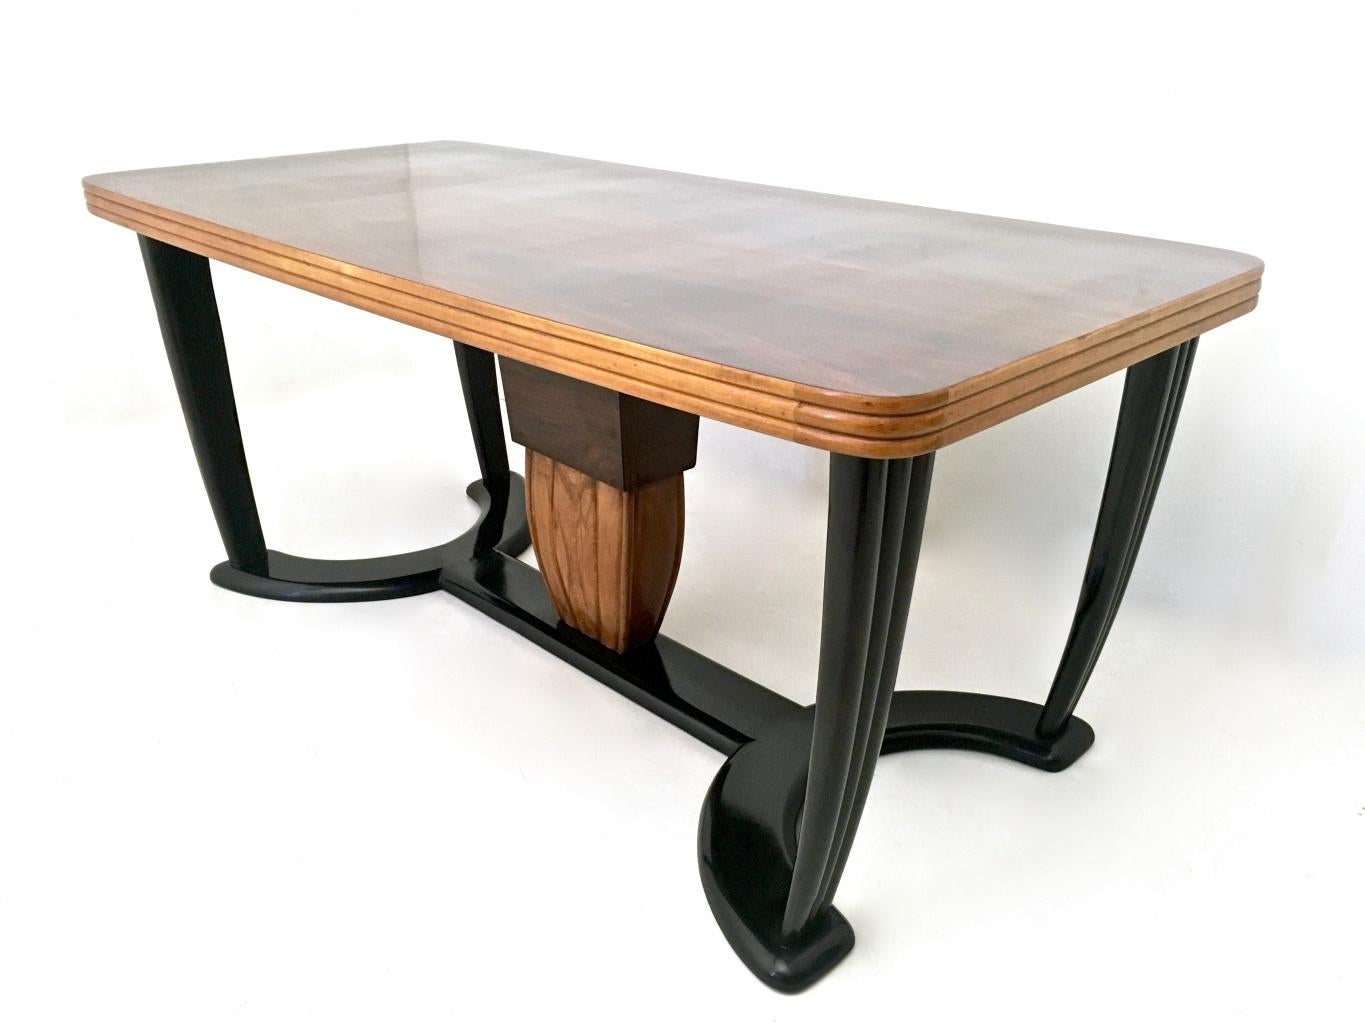 Made in Italy, 1940s.
This table is made in beech with ebonized parts and features maple edges.
It can be used with its original black opaline glass top or without it (since it is removable), as the underlying wooden top is in very good